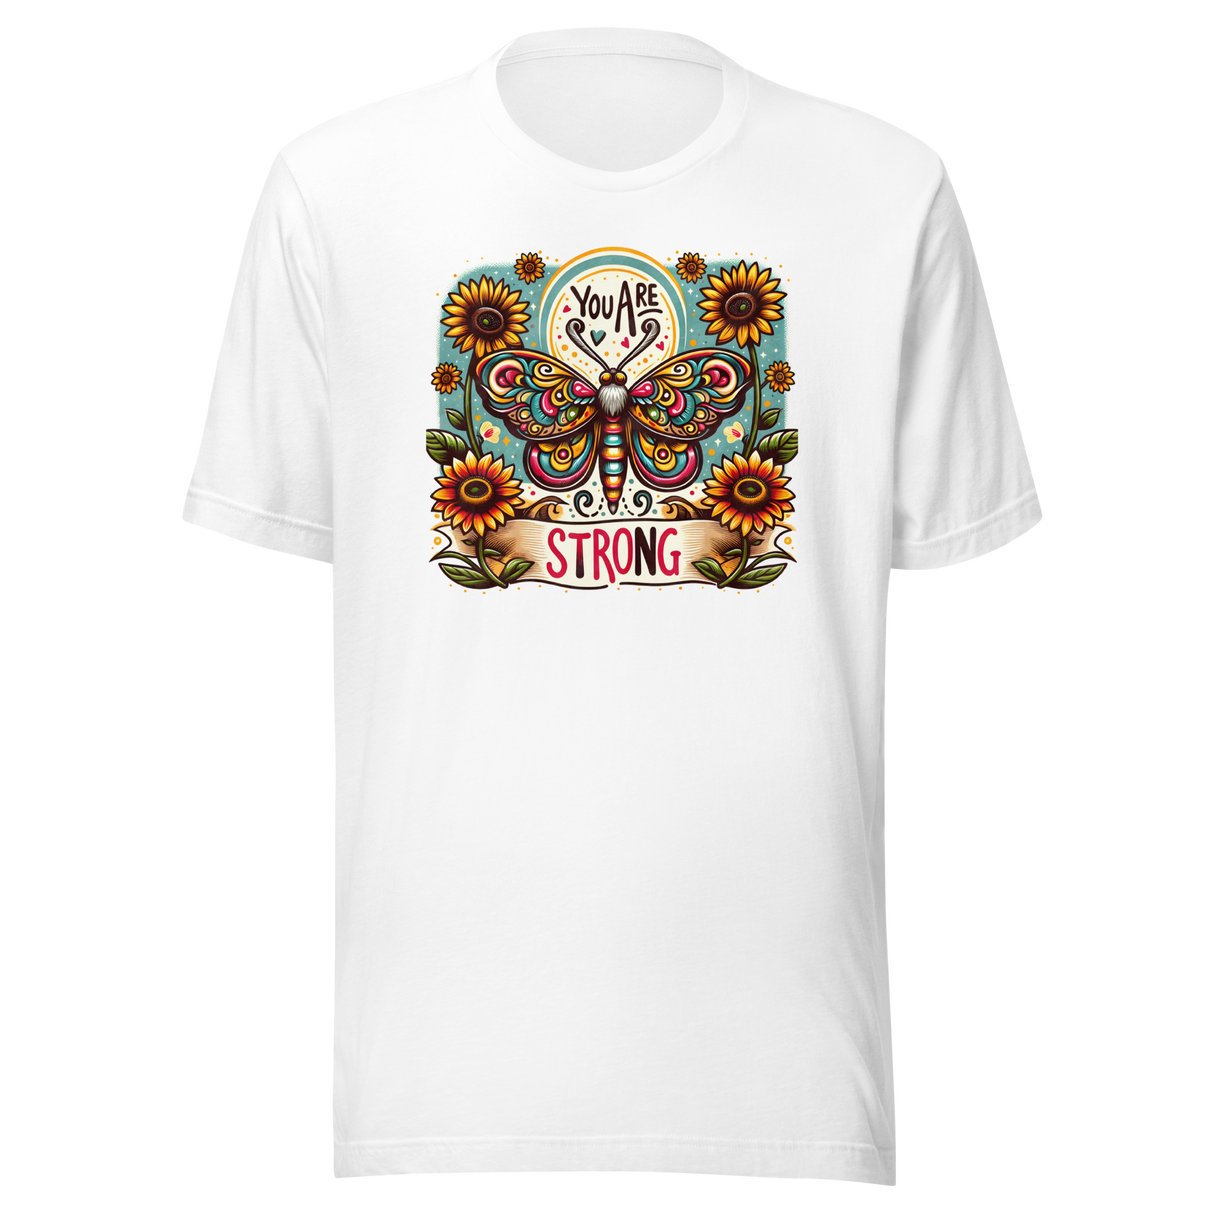 you-are-strong-bohemian-hippie-style-with-butterfly-boho-tee-inspirational-t-shirt-bohemian-tee-hippie-t-shirt-style-tee#color_white